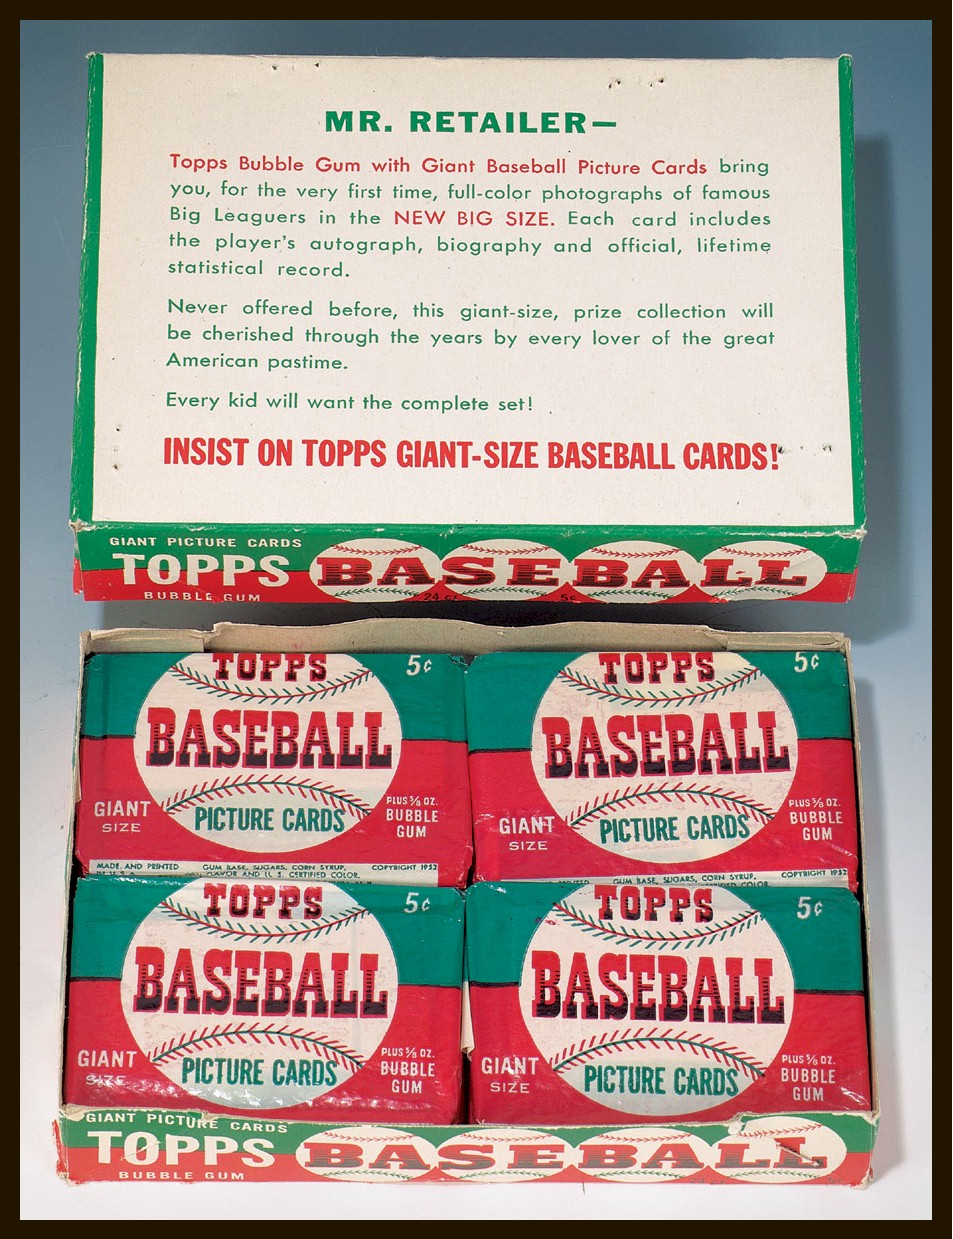 The Holy Grail of baseball cards: 1952 Topps Mickey Mantle